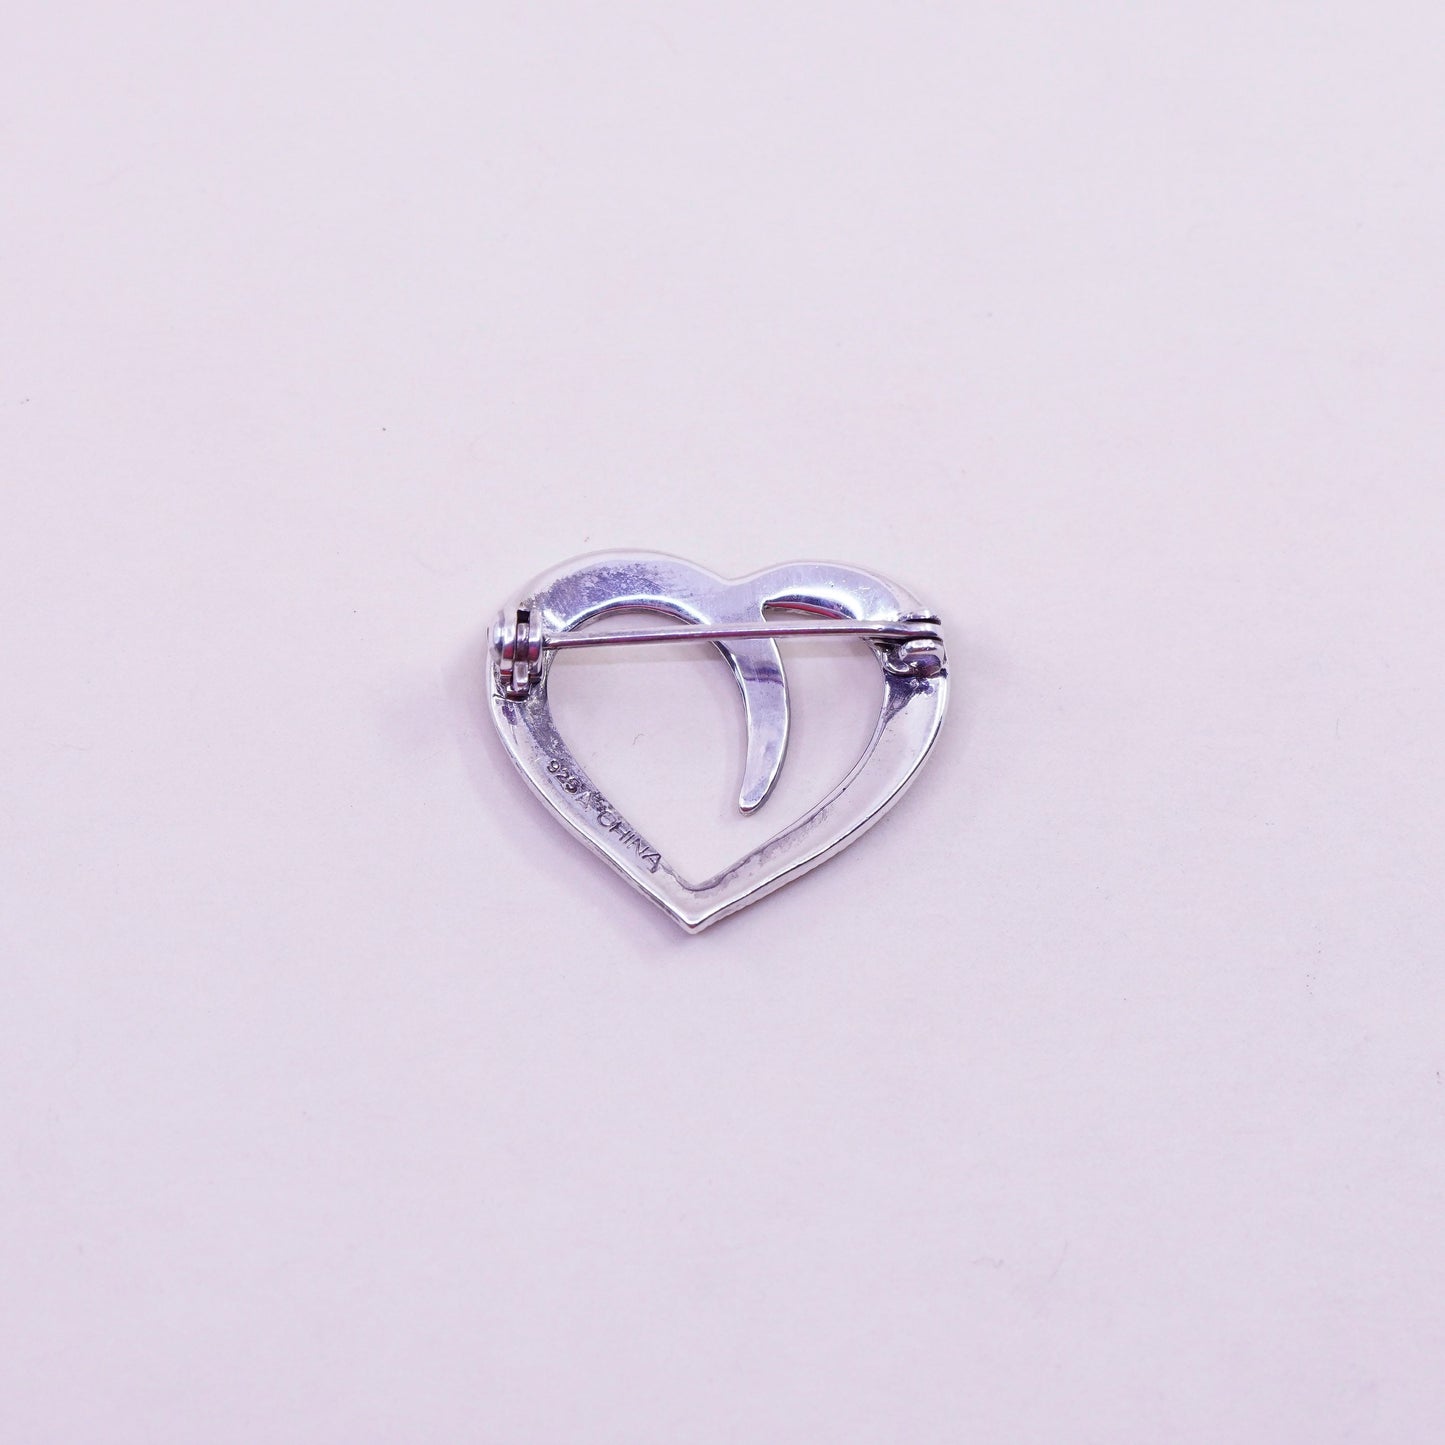 Vintage sterling silver handmade brooch, 925 heart with marcasite details